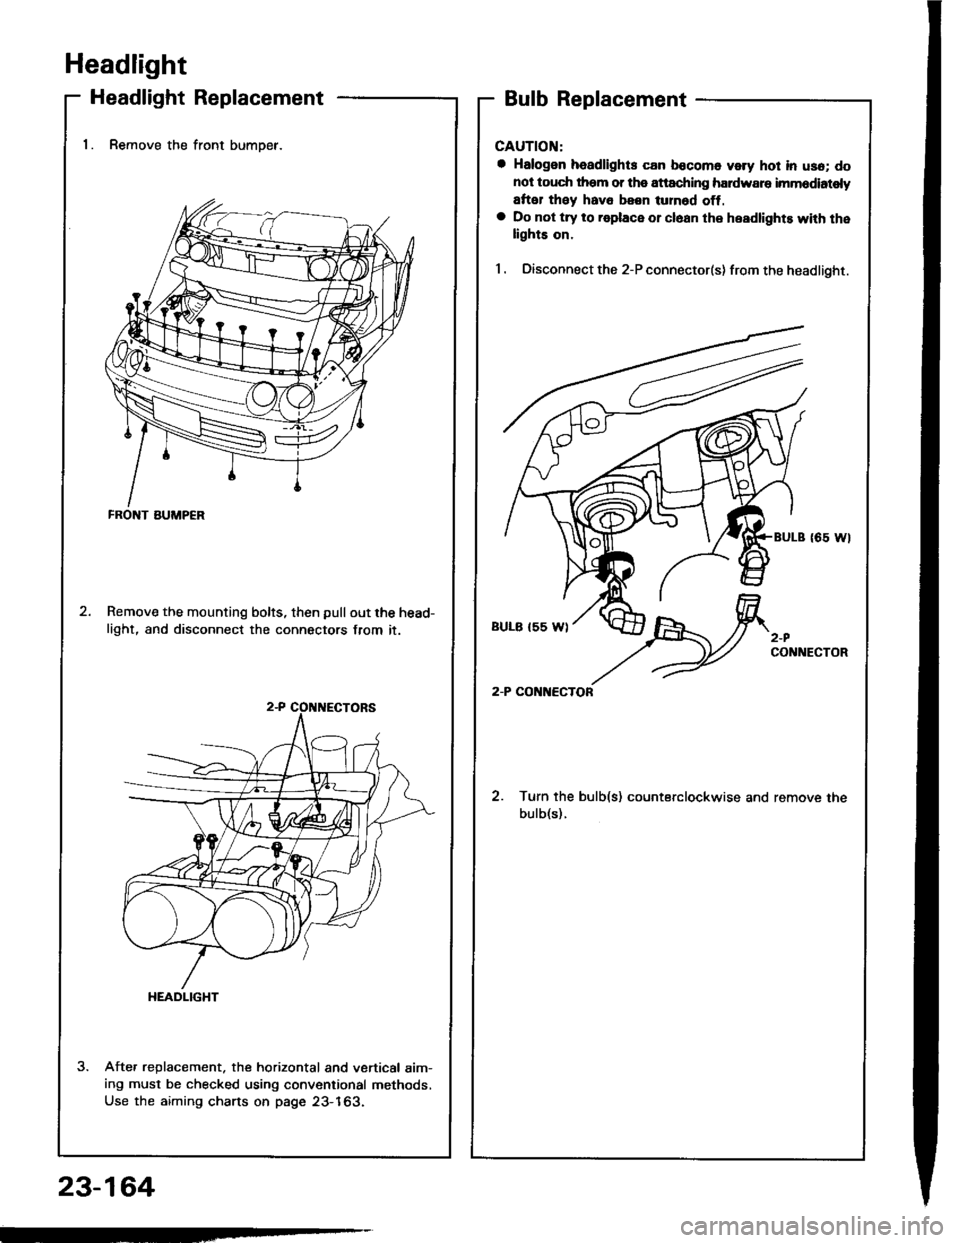 HONDA INTEGRA 1994 4.G Workshop Manual Headlight
Headlight Replacement
1. Remove the front bumoer.
Remove the mounting bolts, then pullout the head-
light, and disconnect the connectors from it.
Afte. replacement. the horizontal and vertic